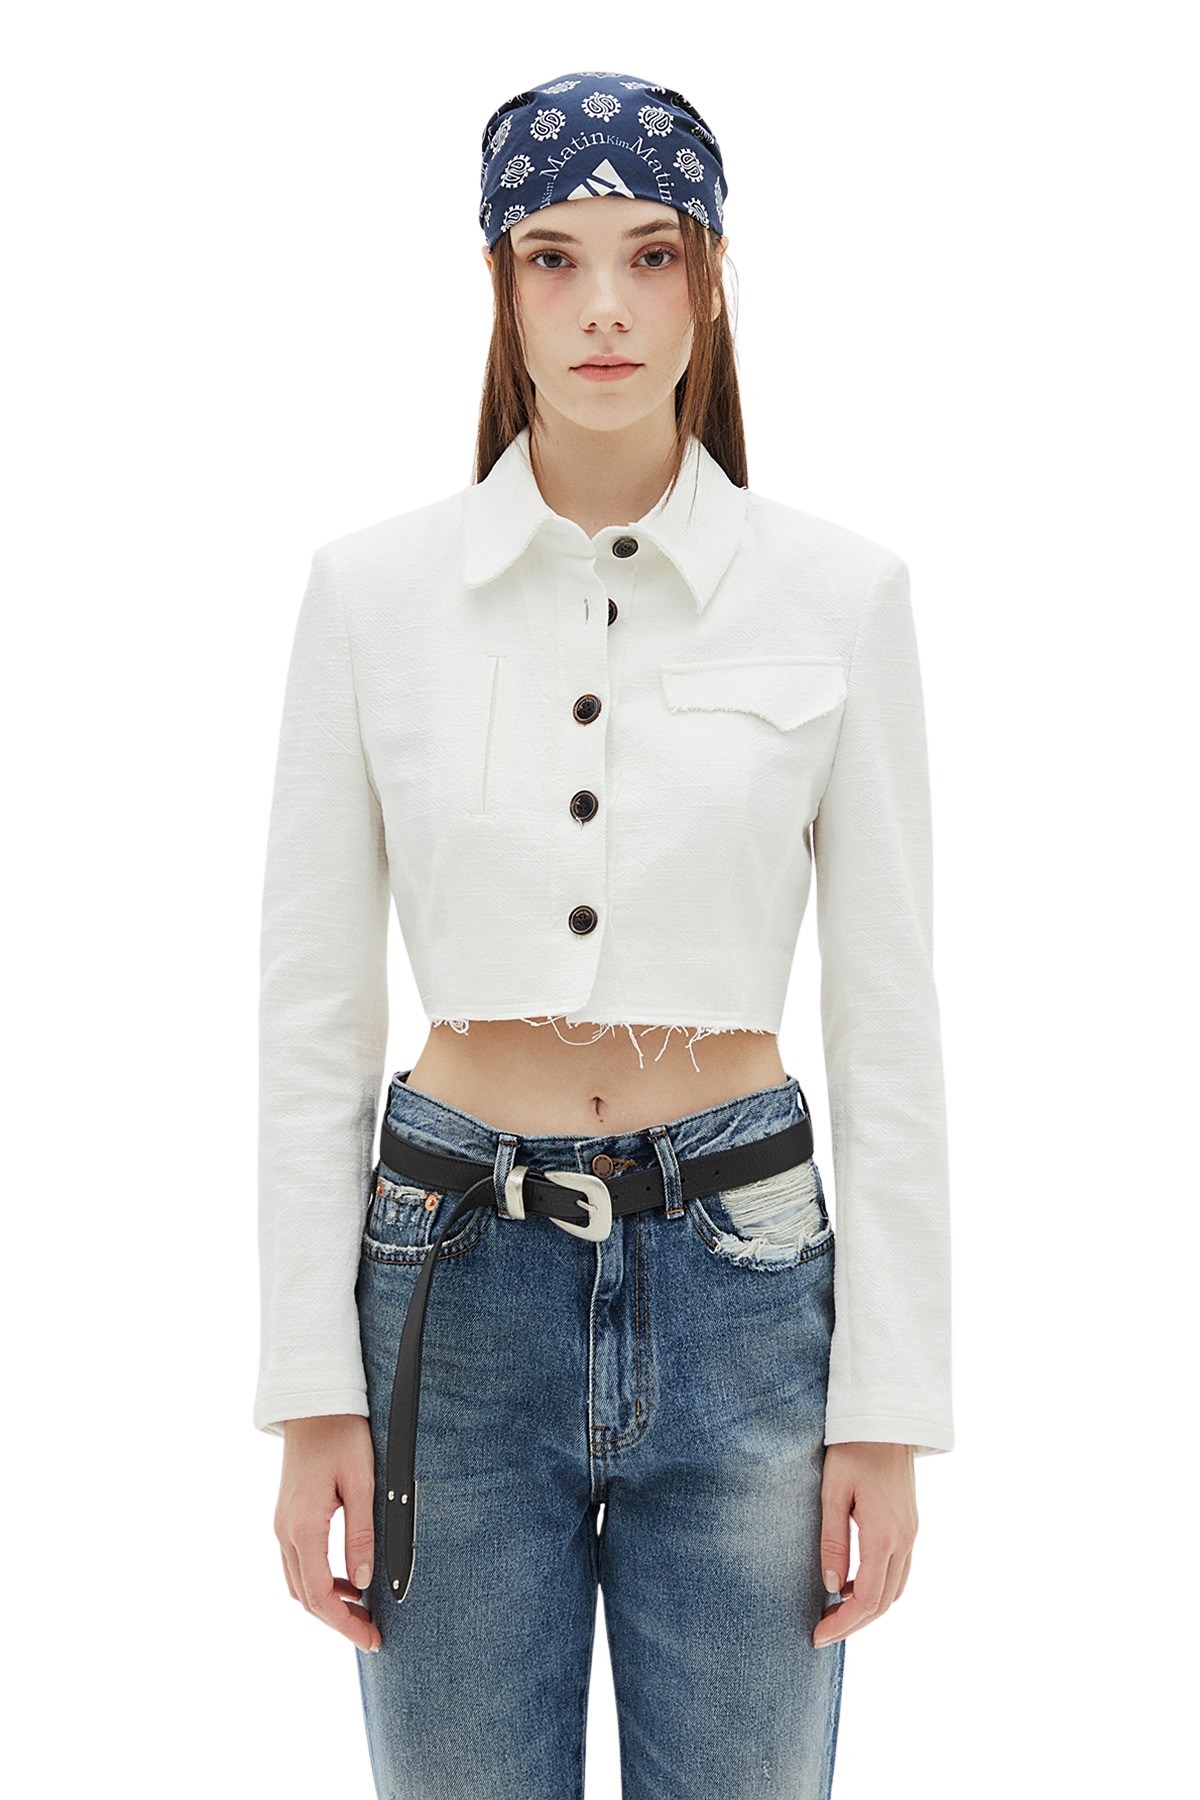 CLASSIC CROP JACKET IN WHITE